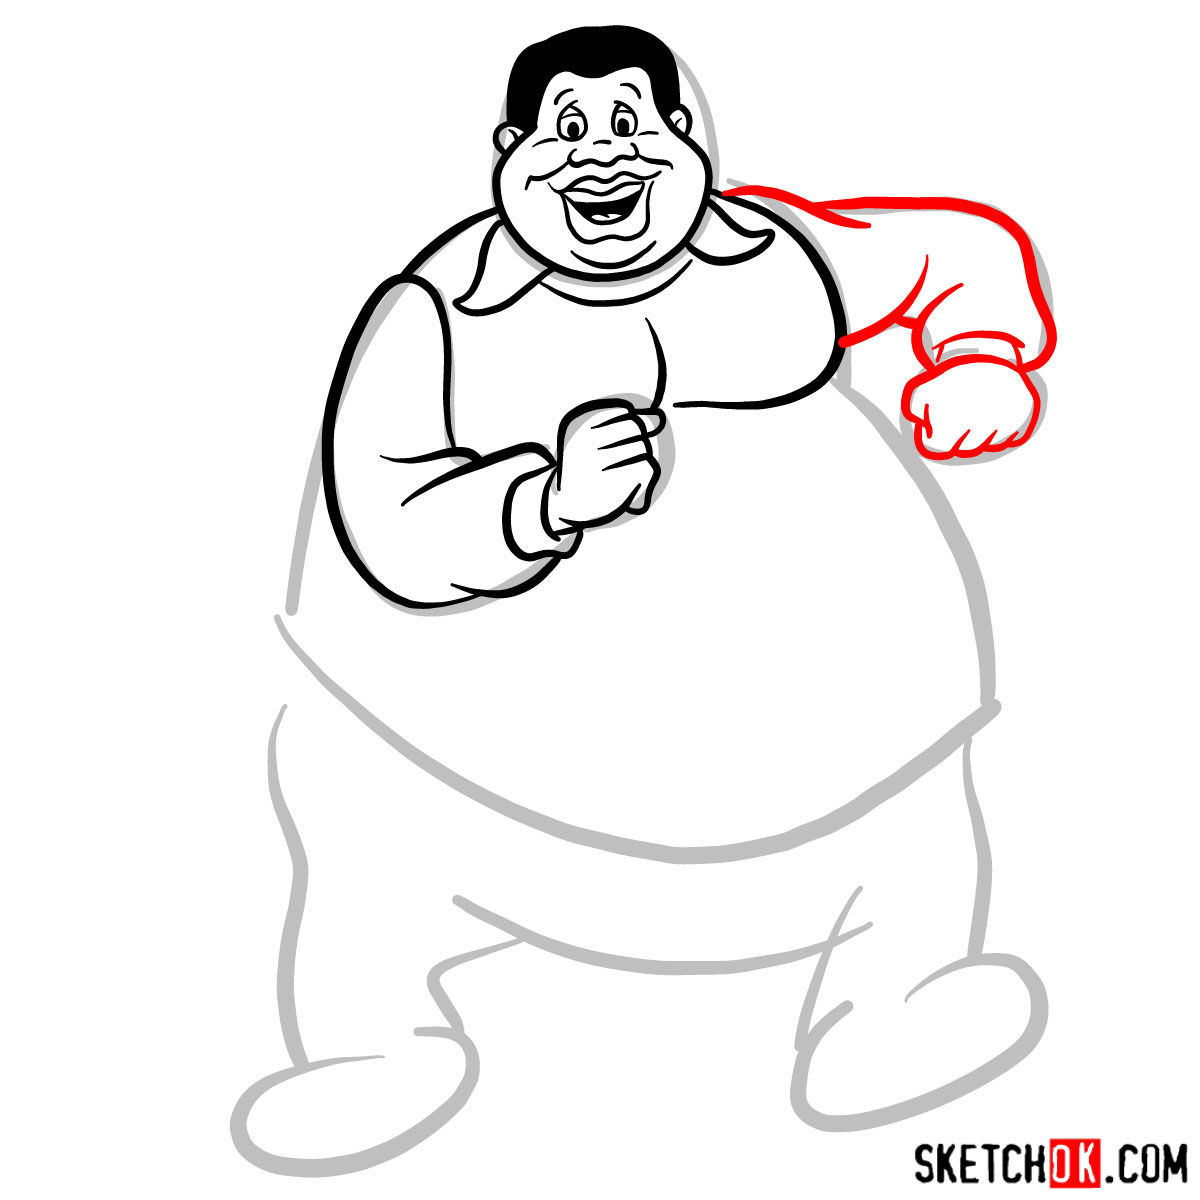 How to draw Fat Albert - Sketchok easy drawing guides